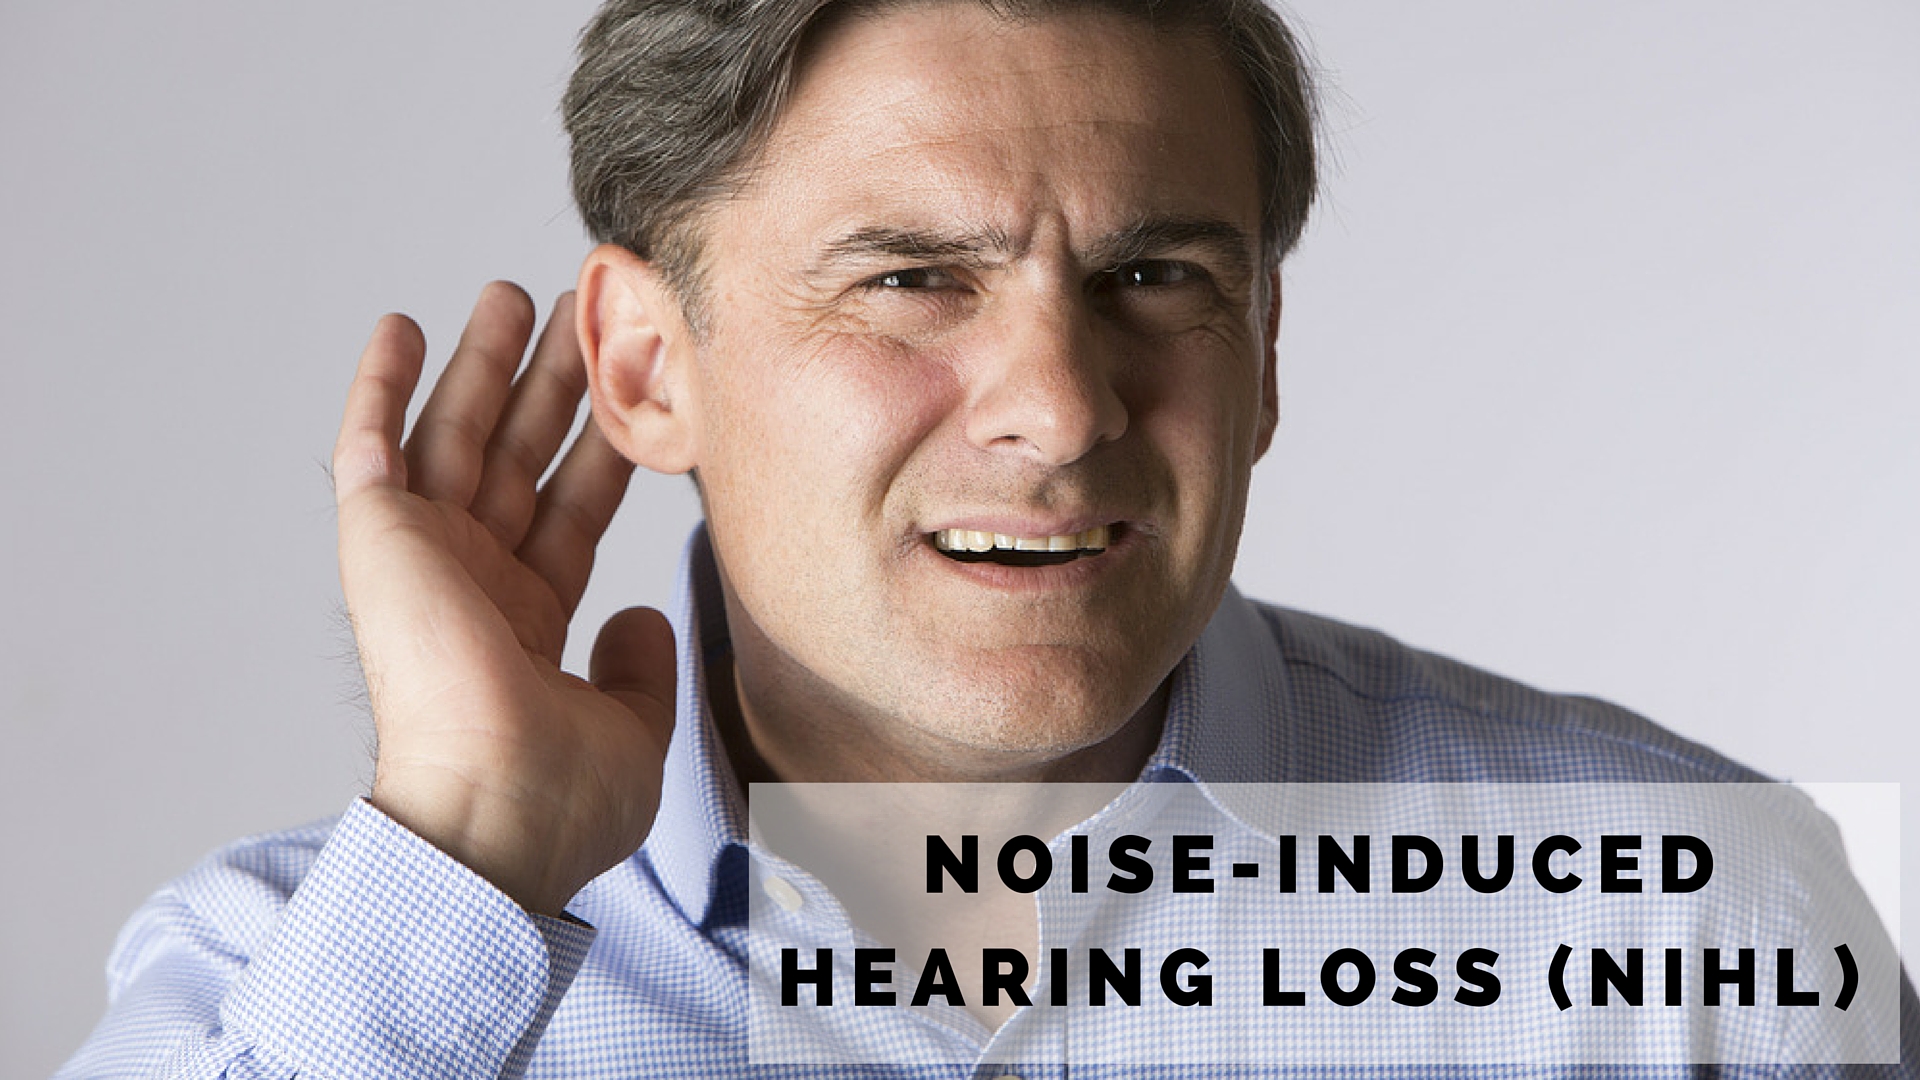 Noise-induced hearing loss (NIHL).